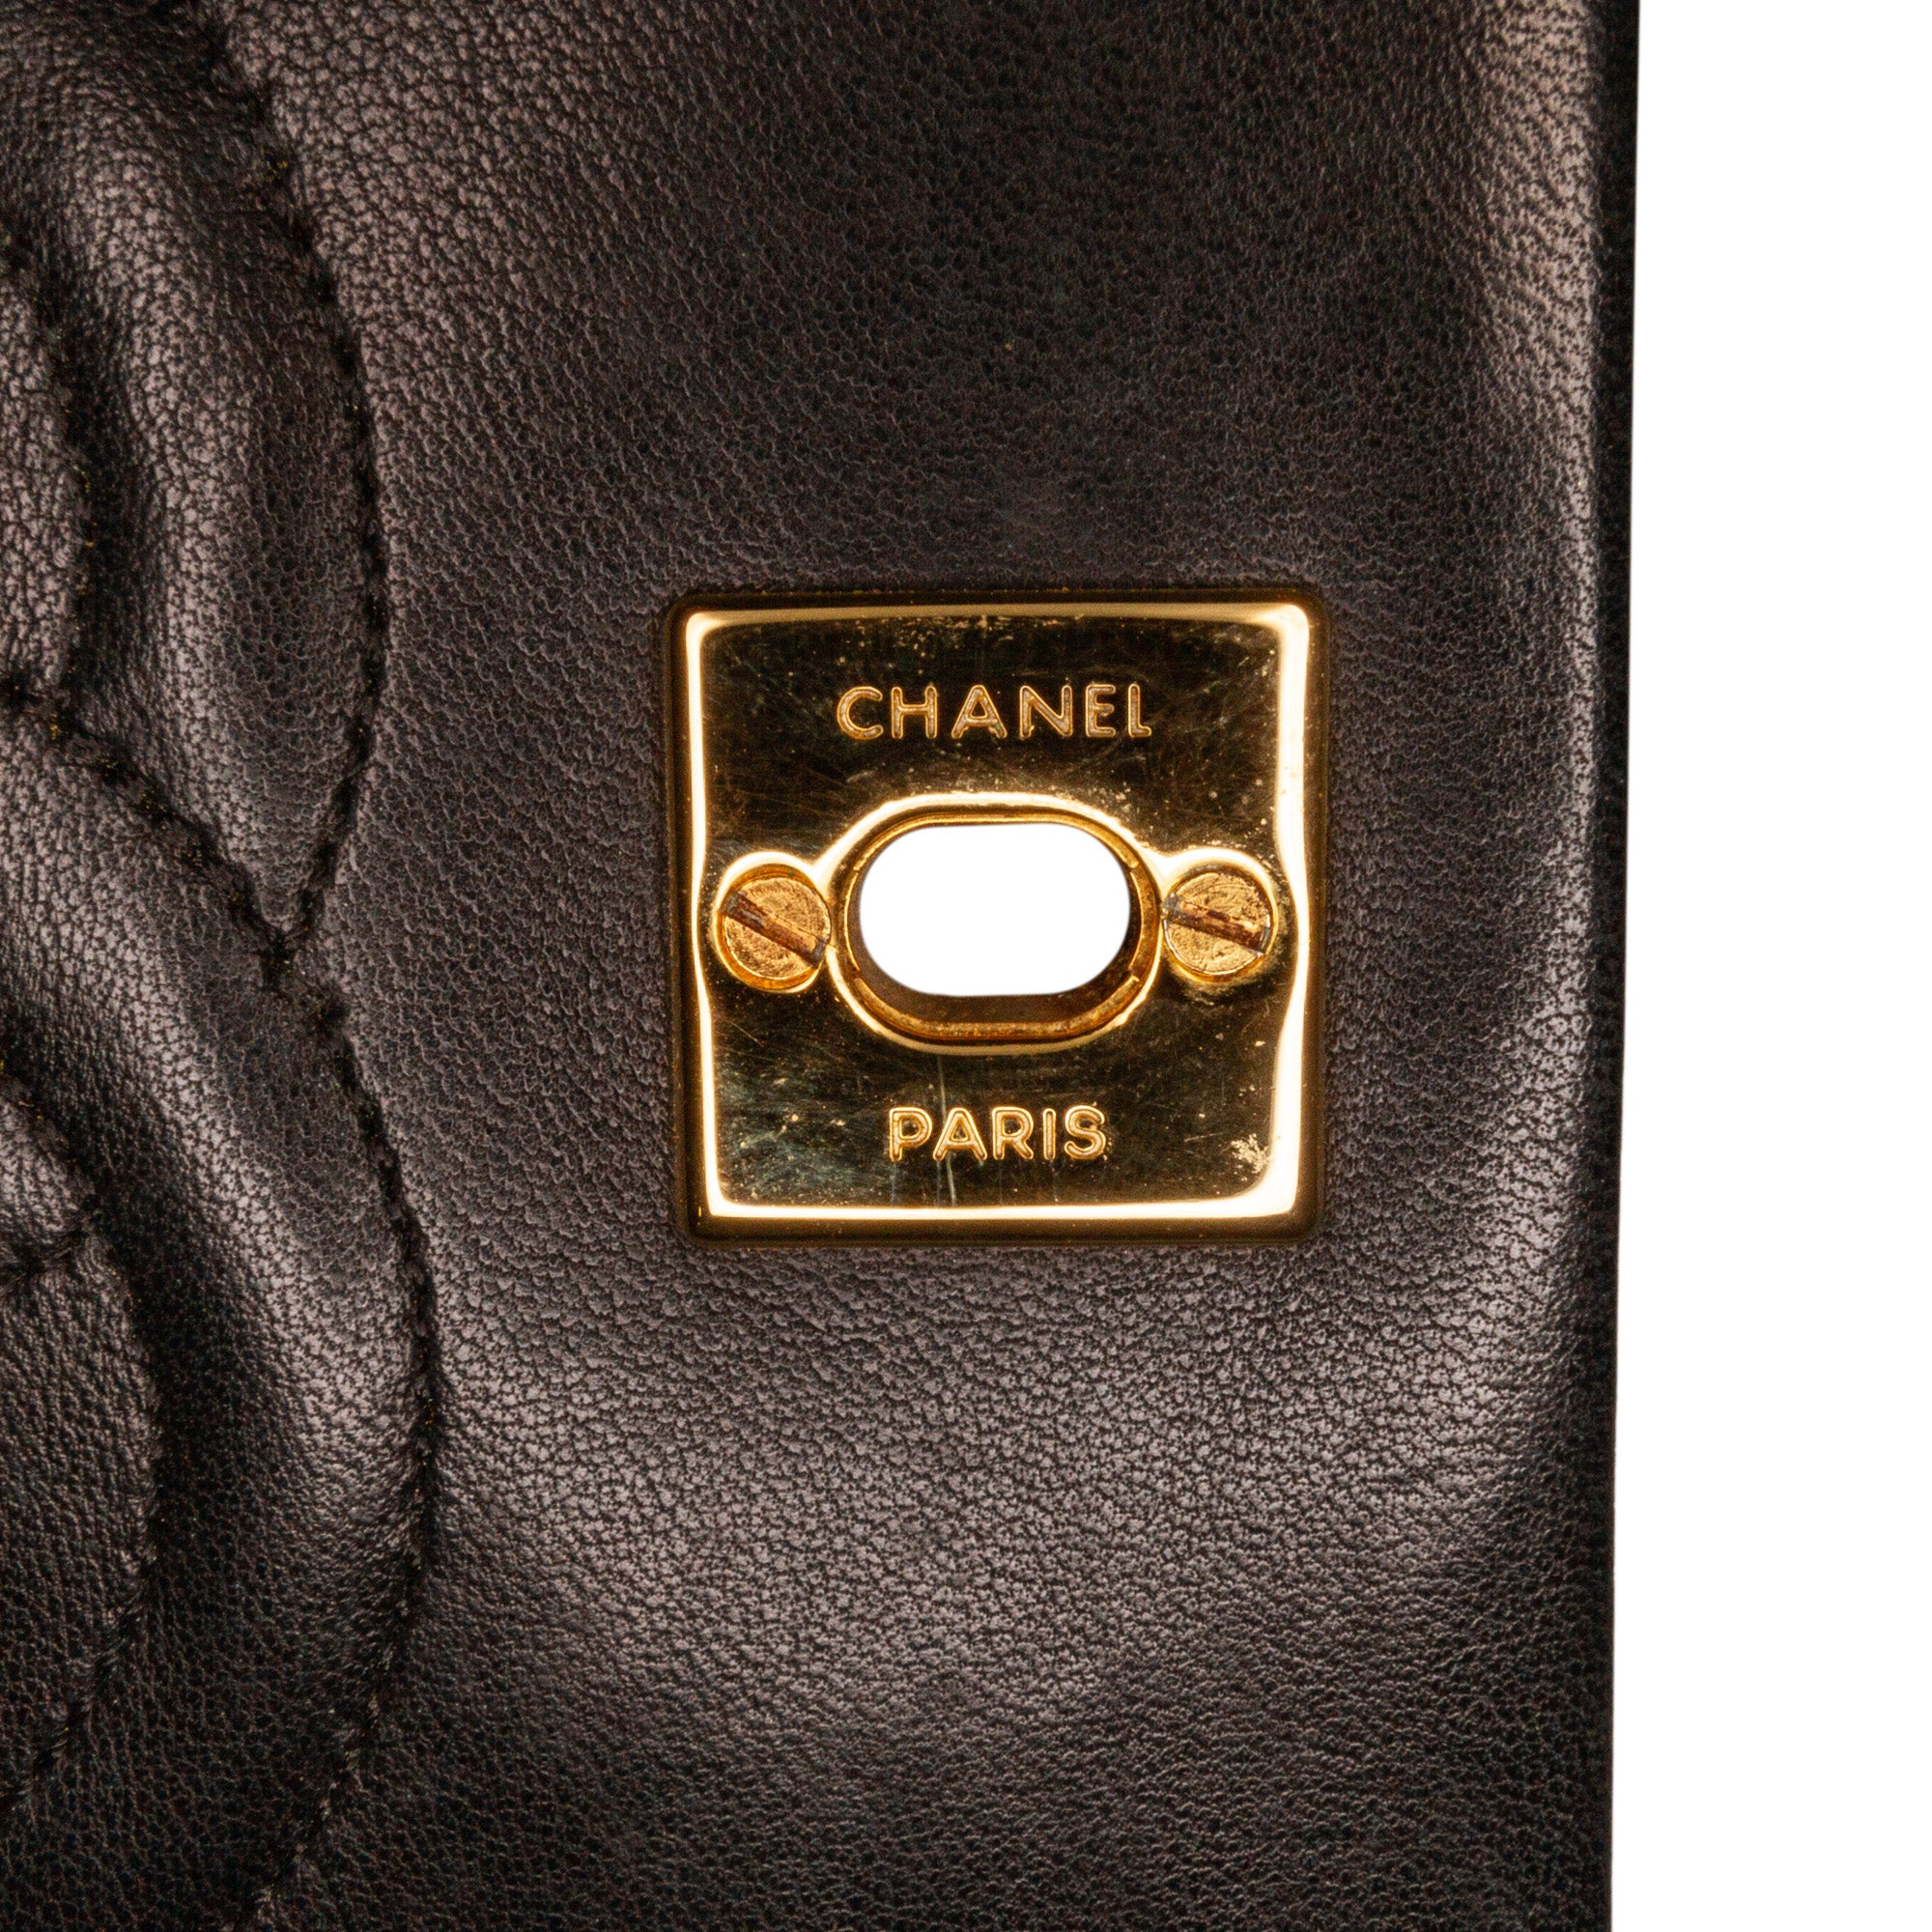 Black Chanel Quilted Lambskin Double Flap Bag, Cra-wallonieShops Revival